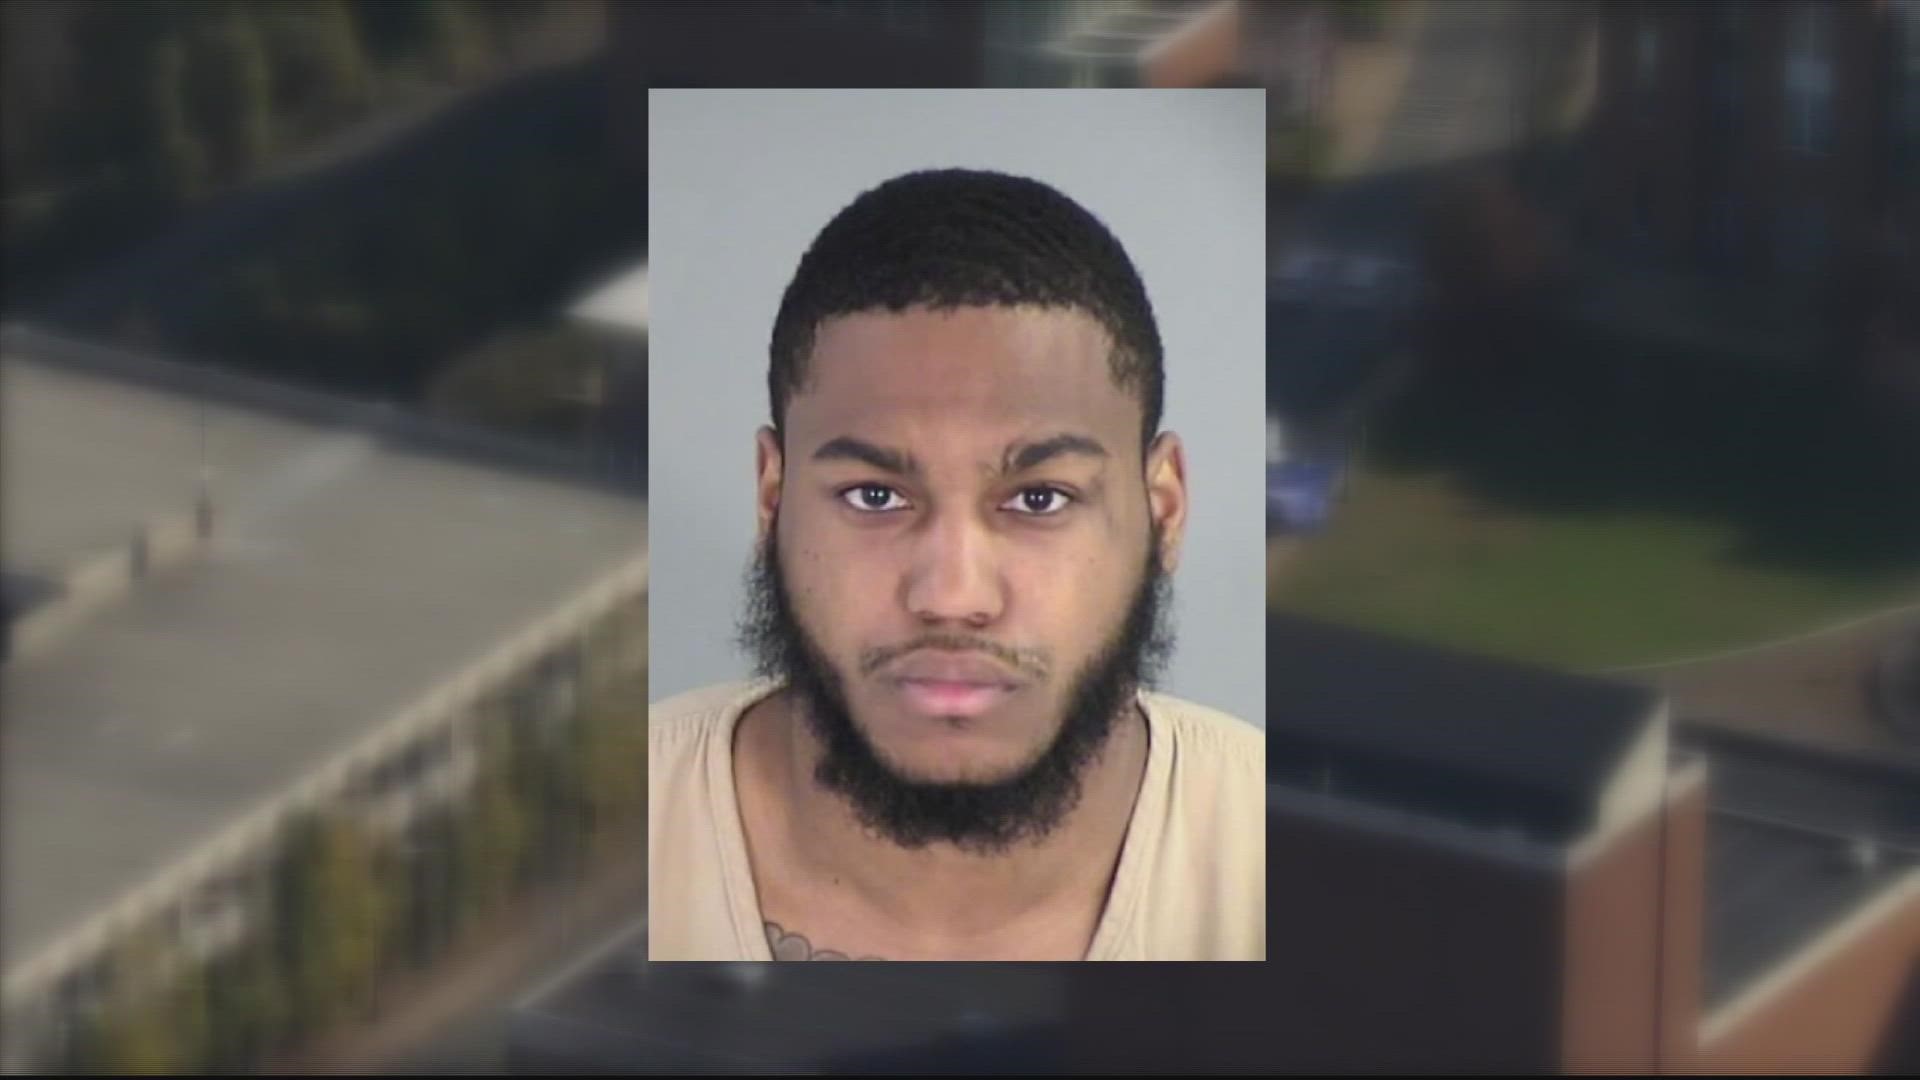 Christopher Darnell Jones Jr. has been charged with murder in the deaths of three of his classmates. Prosecutors are alleging he targeted his victims.